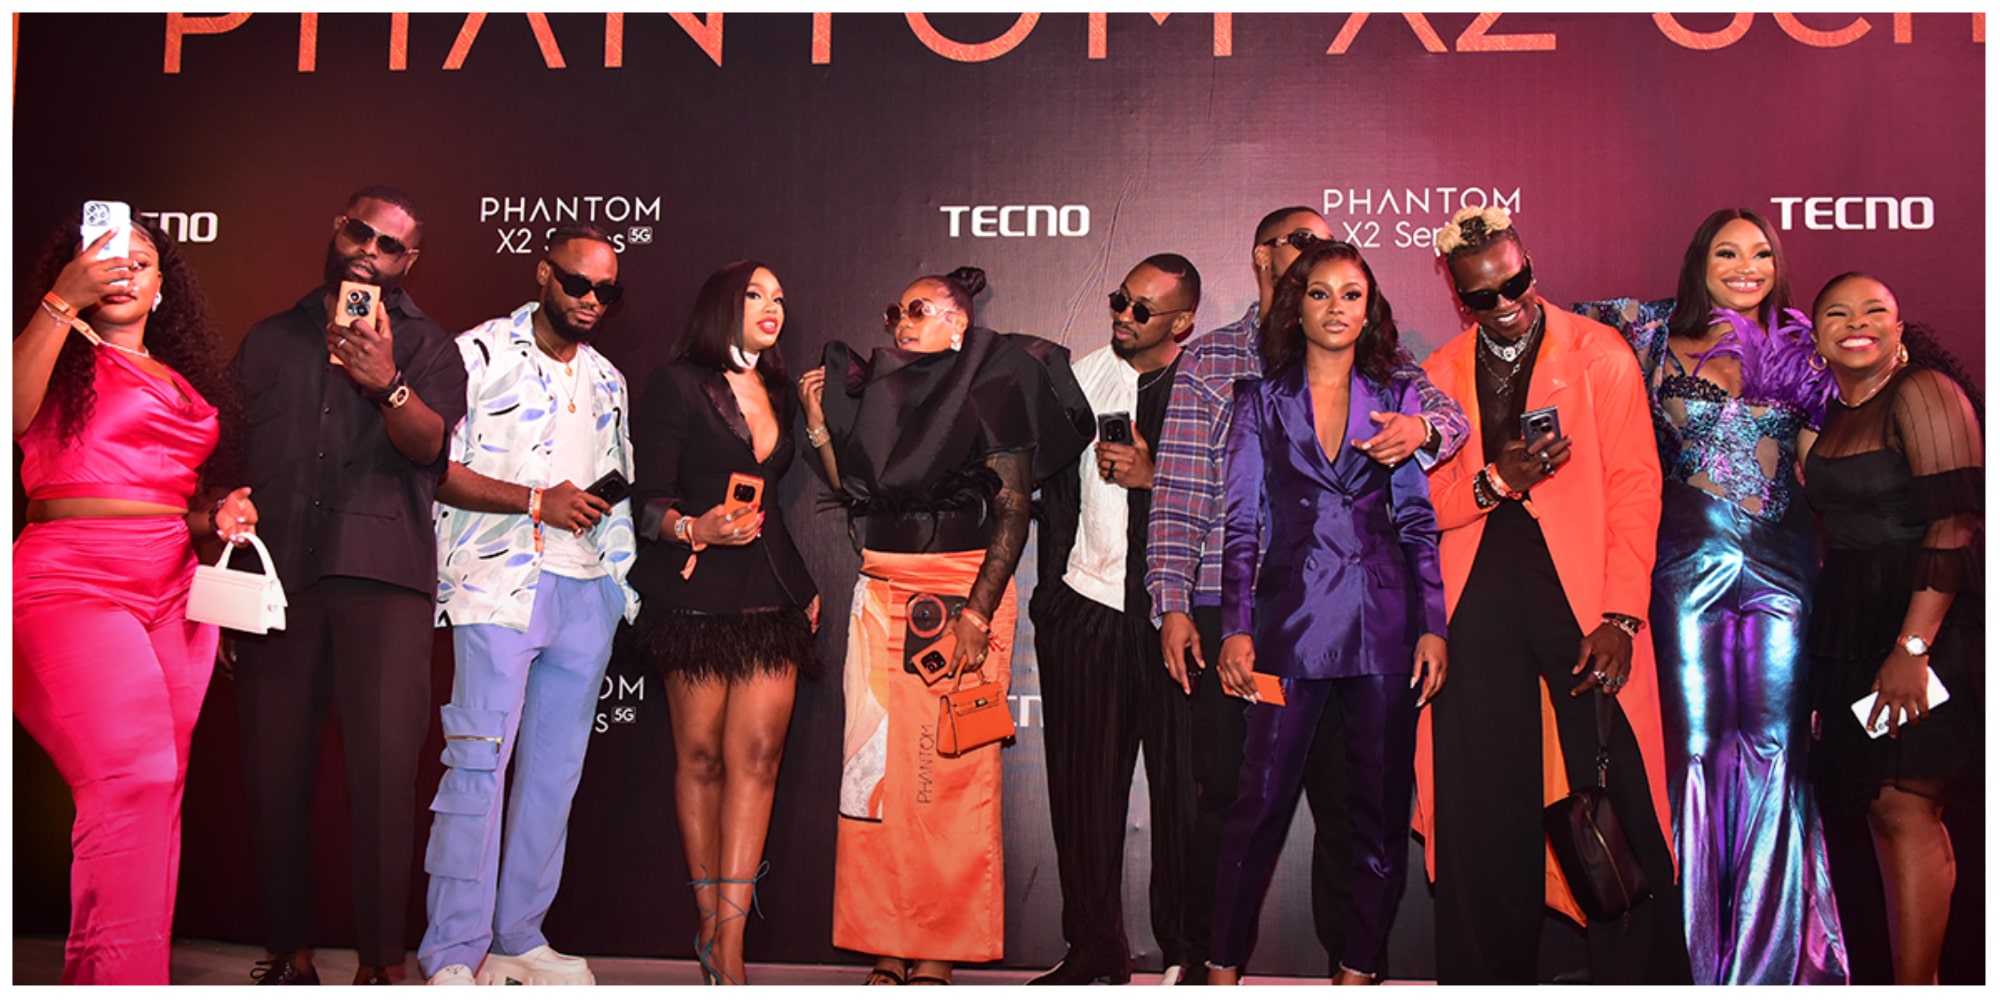 Tecno Hosts Stars In Style With New Phantom X2 Launch